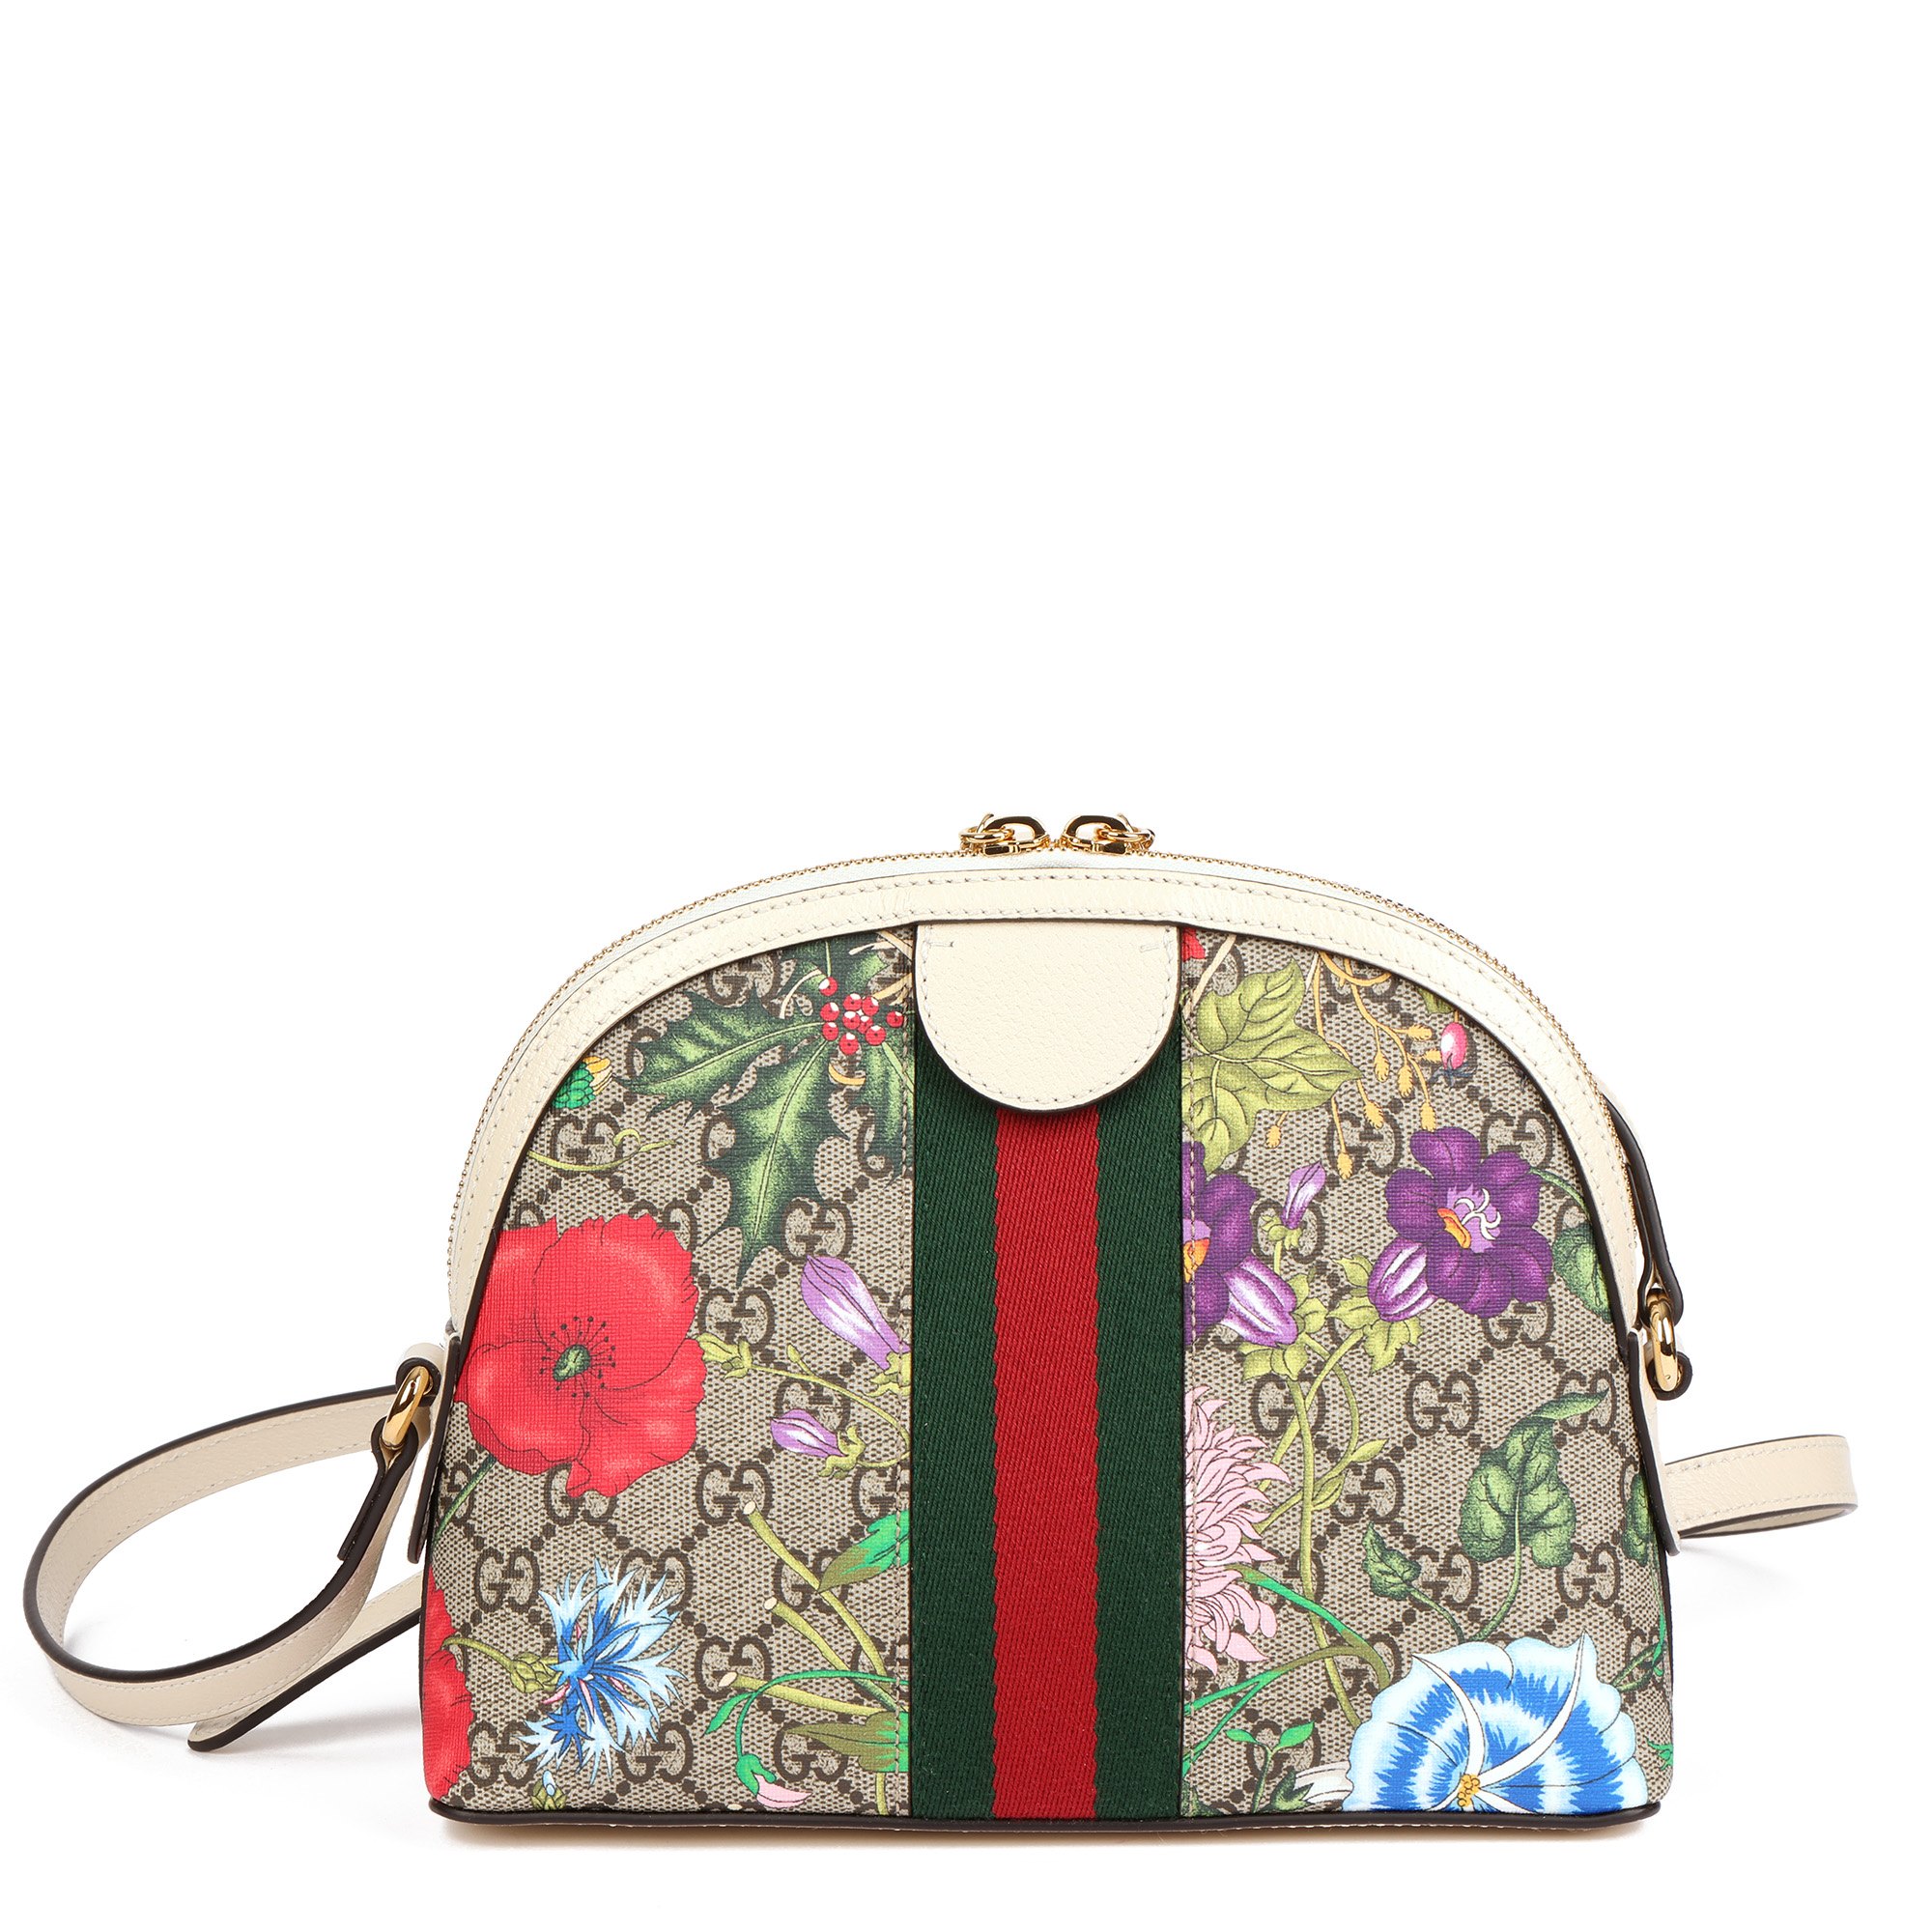 Gucci White Pigskin Leather & GG Supreme Flora Canvas Small Ophidia Shoulder Bag